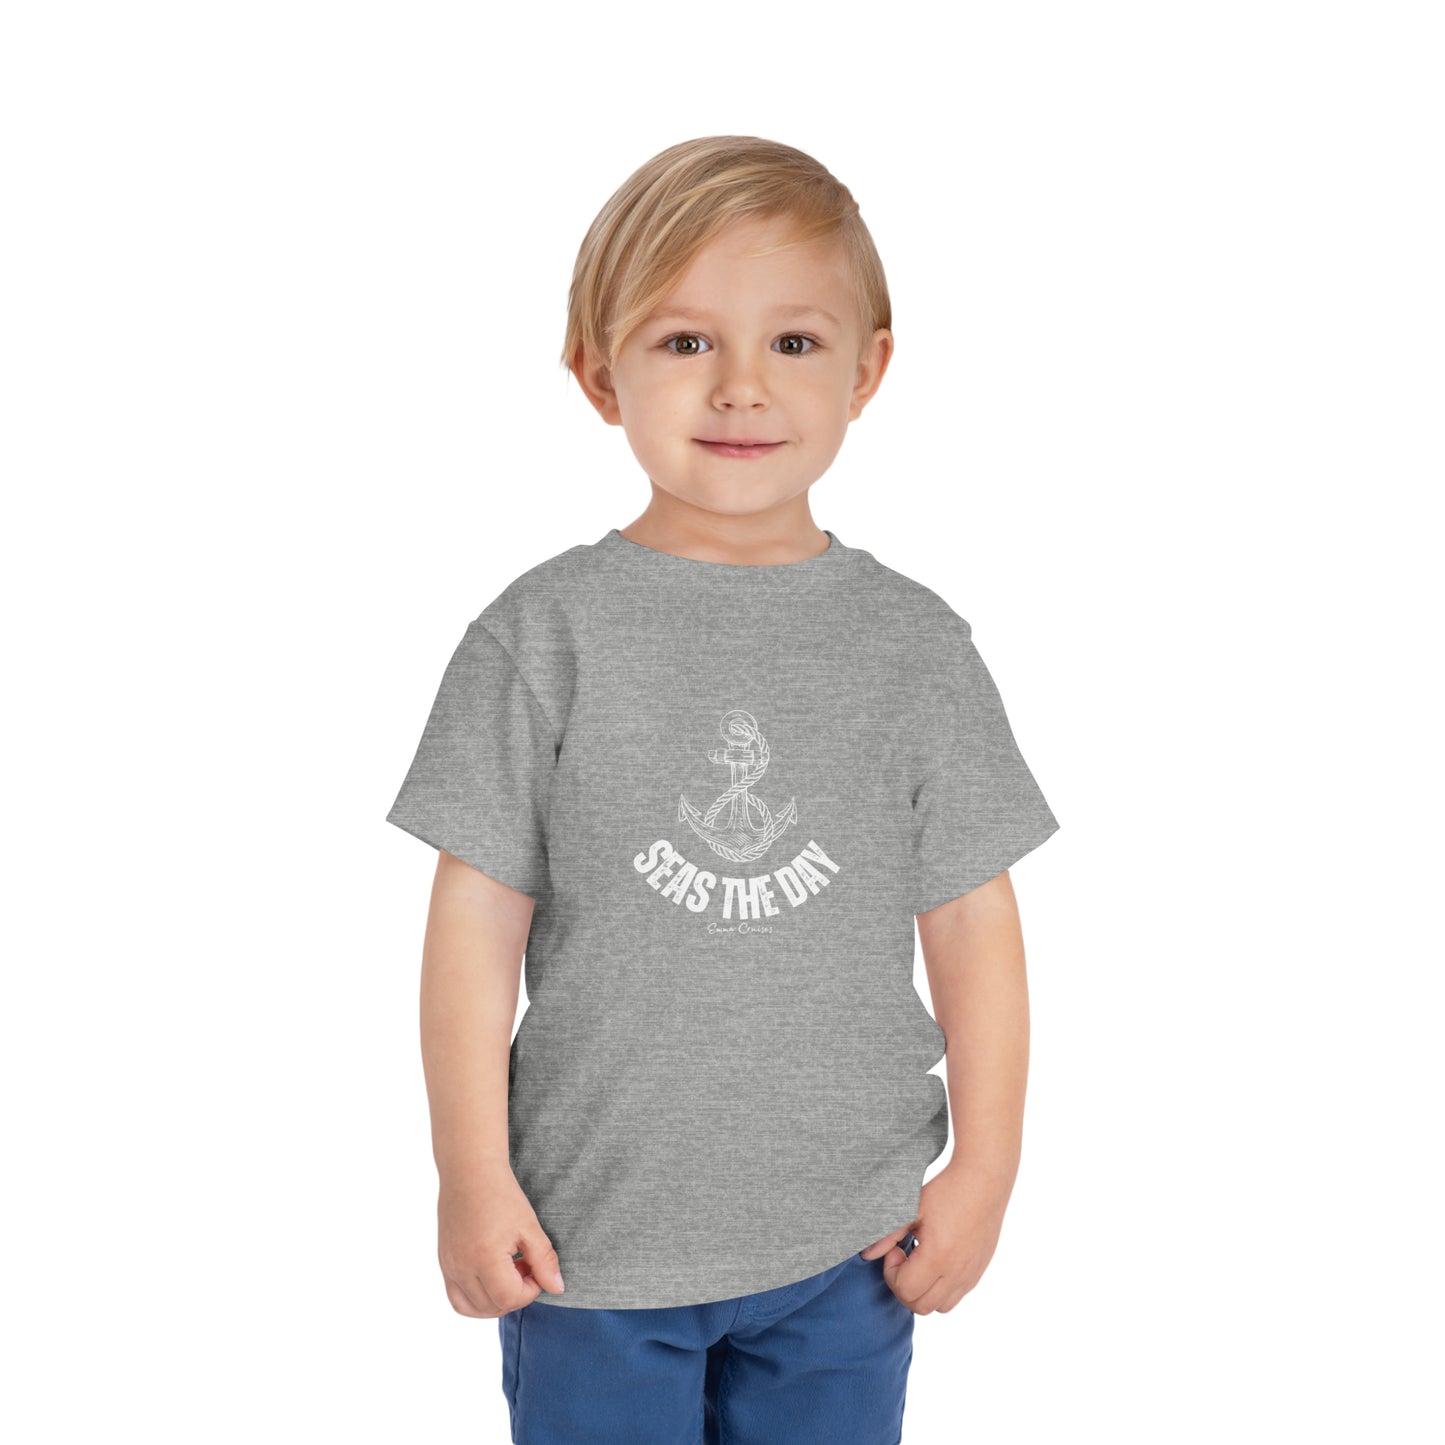 Seas the Day - Toddler UNISEX T-Shirt